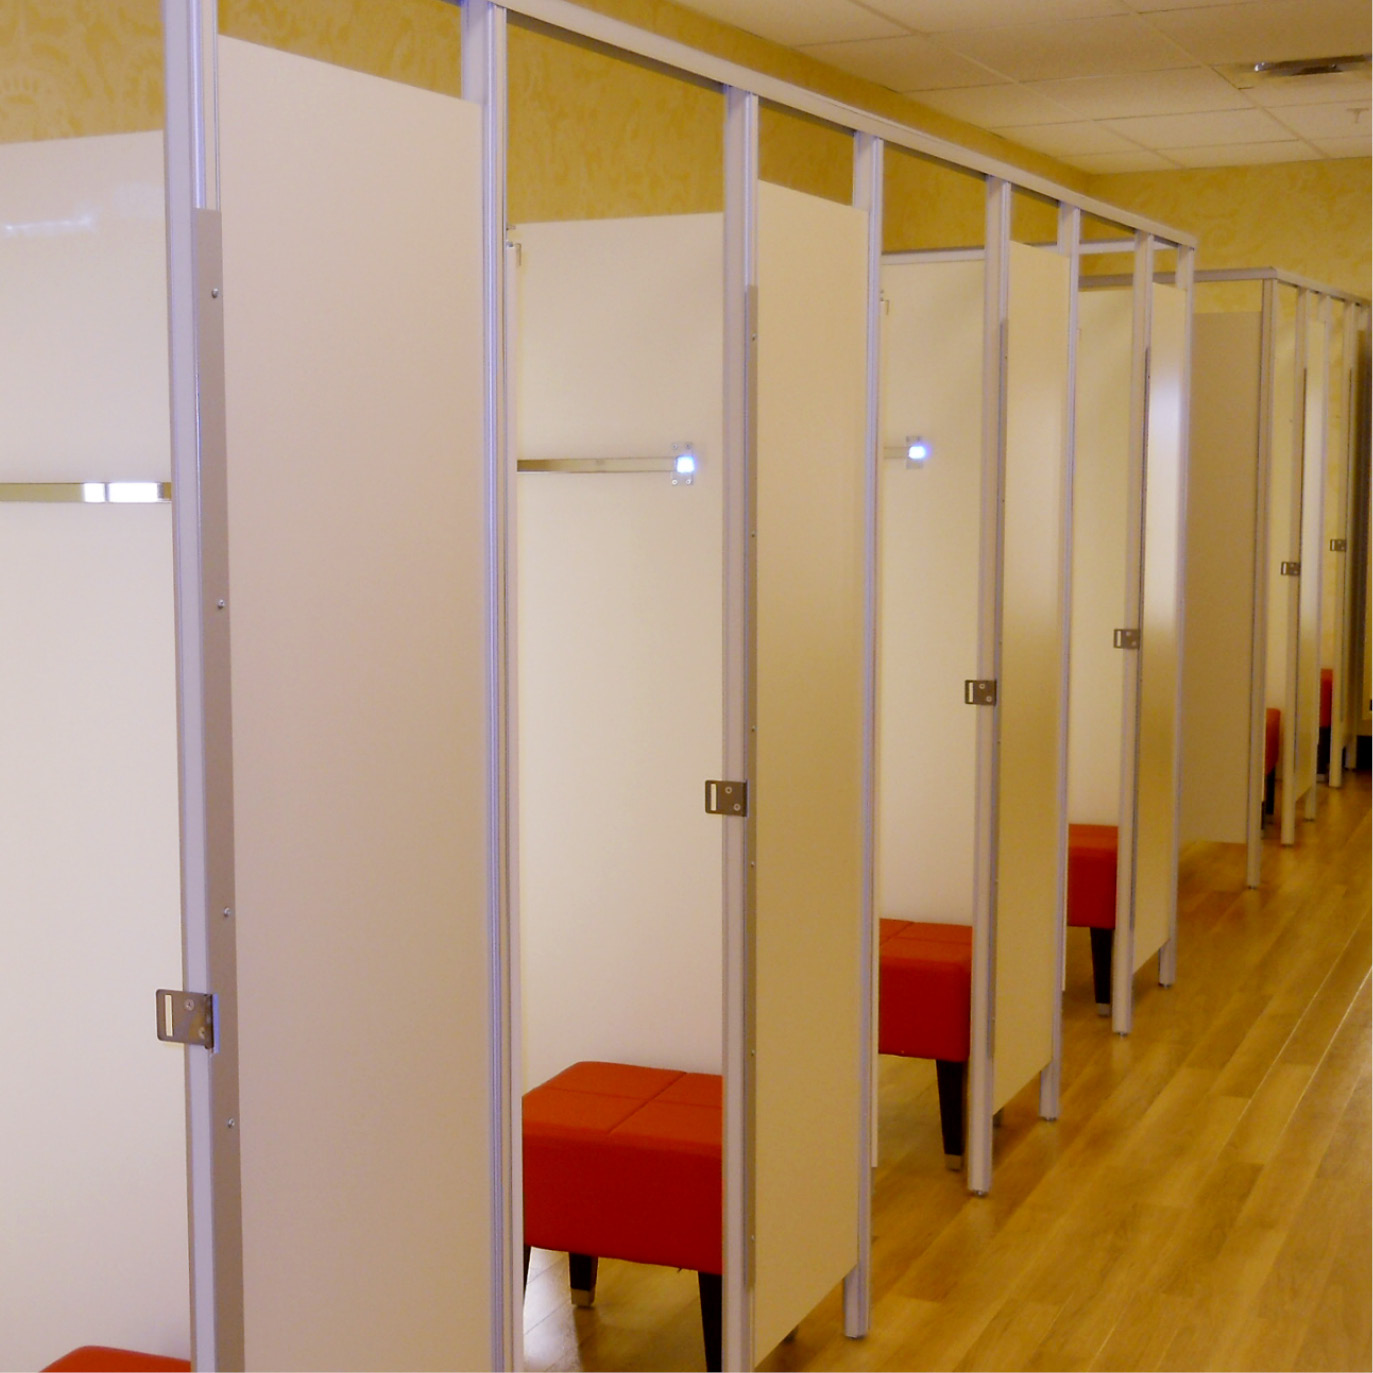 Fitting Rooms Retail Wall Panels Retail Fixtures And Slatwall Systems